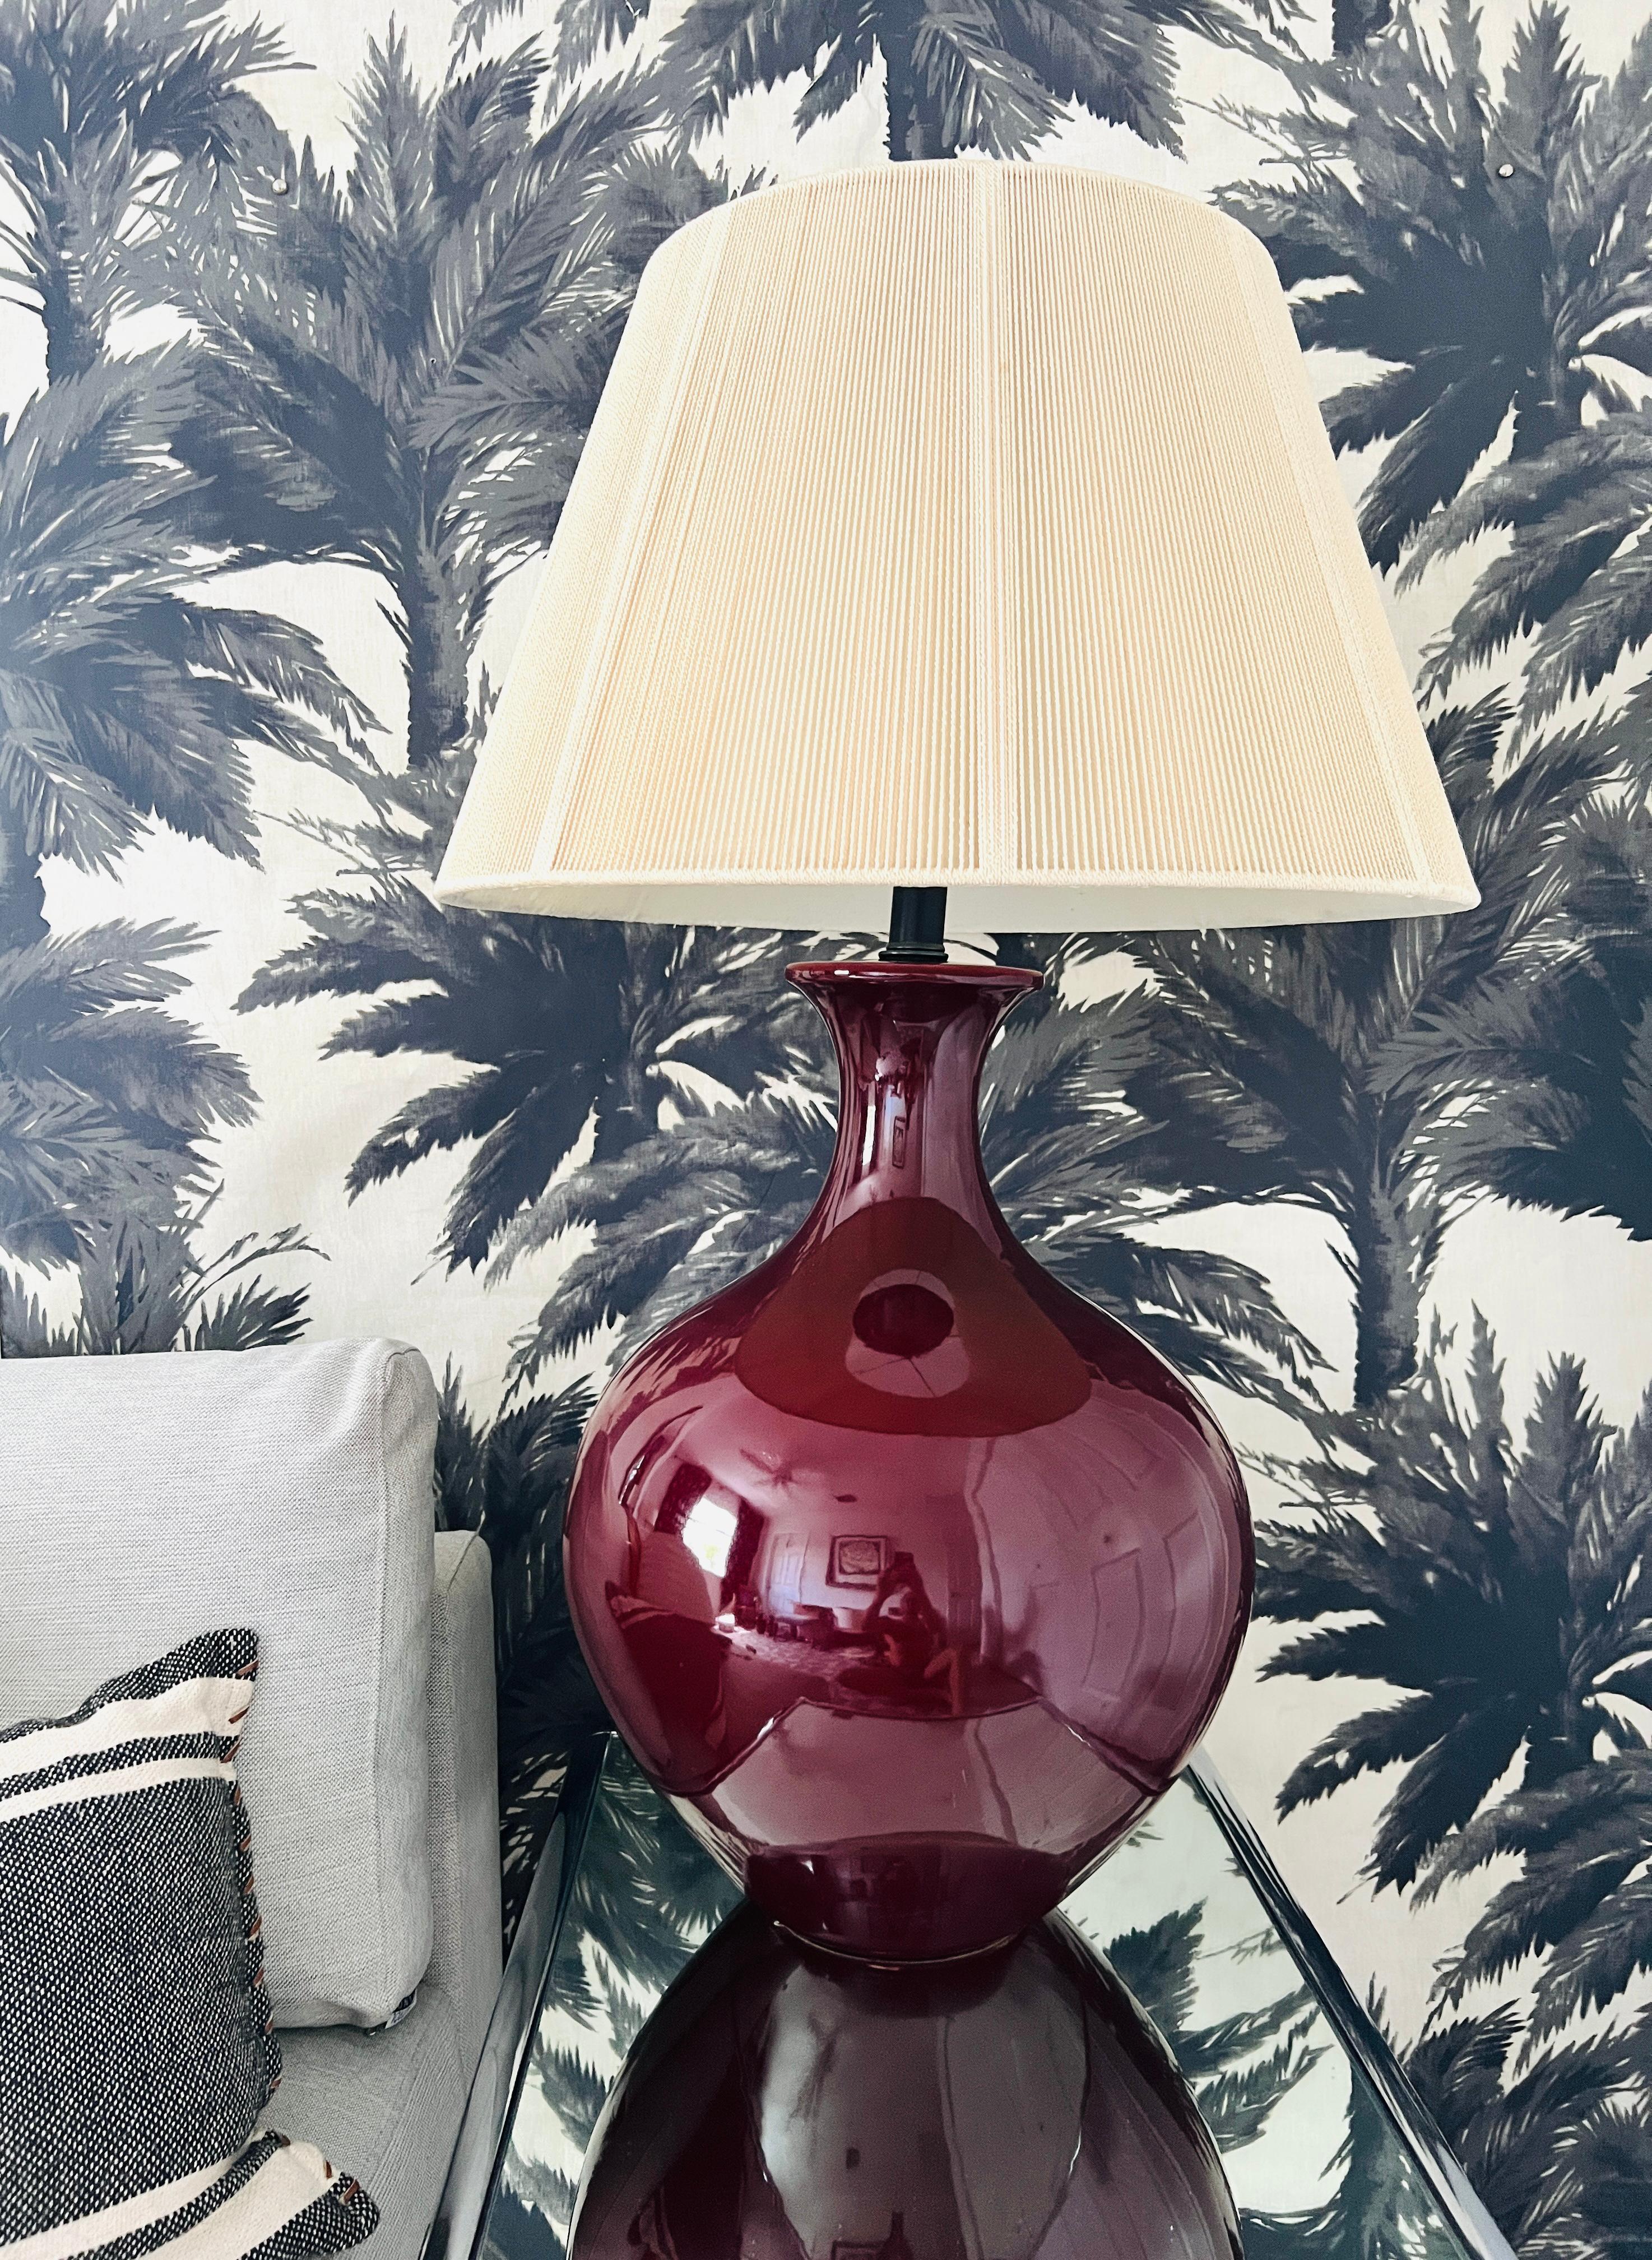 Chinese Monumental Porcelain Oxblood Lamp in Burgundy Red by Marbro, c. 1970's